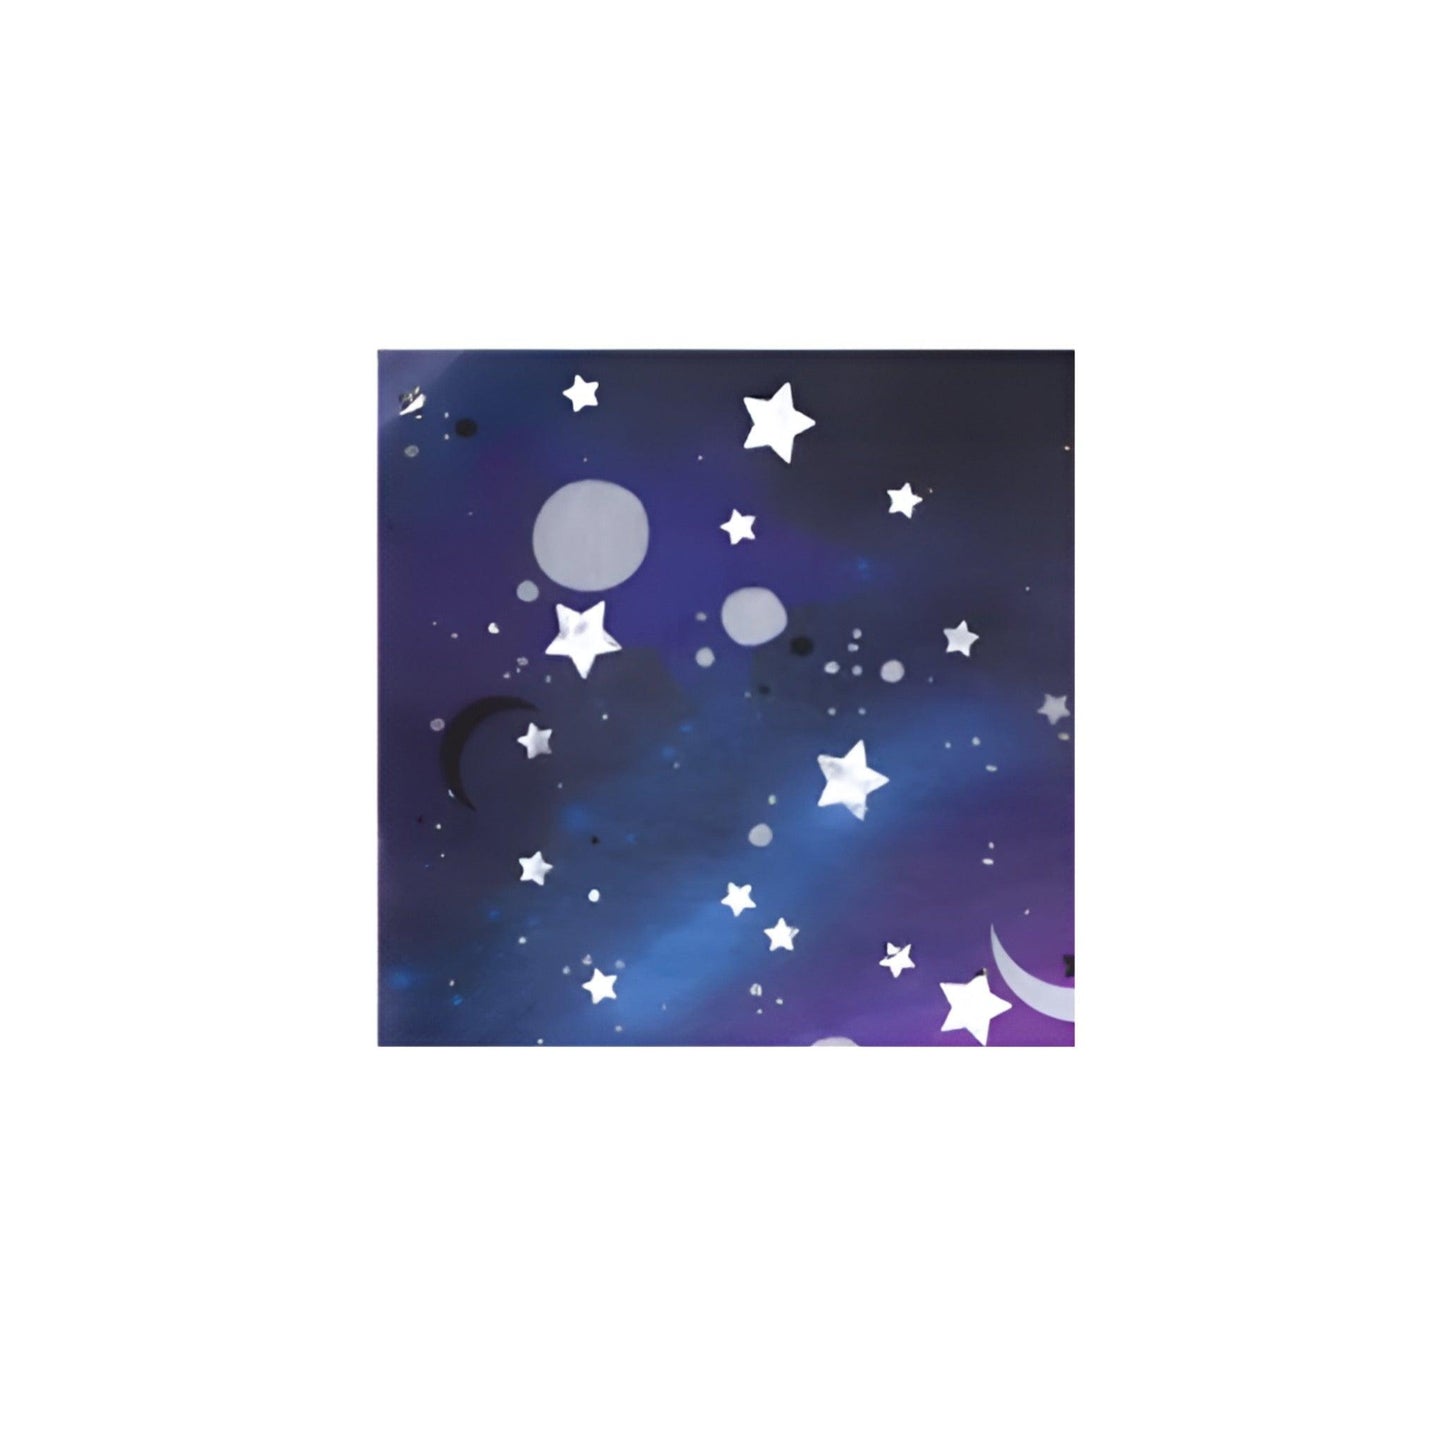 Navy blue galaxy napkins featuring white stars, planets & moons.